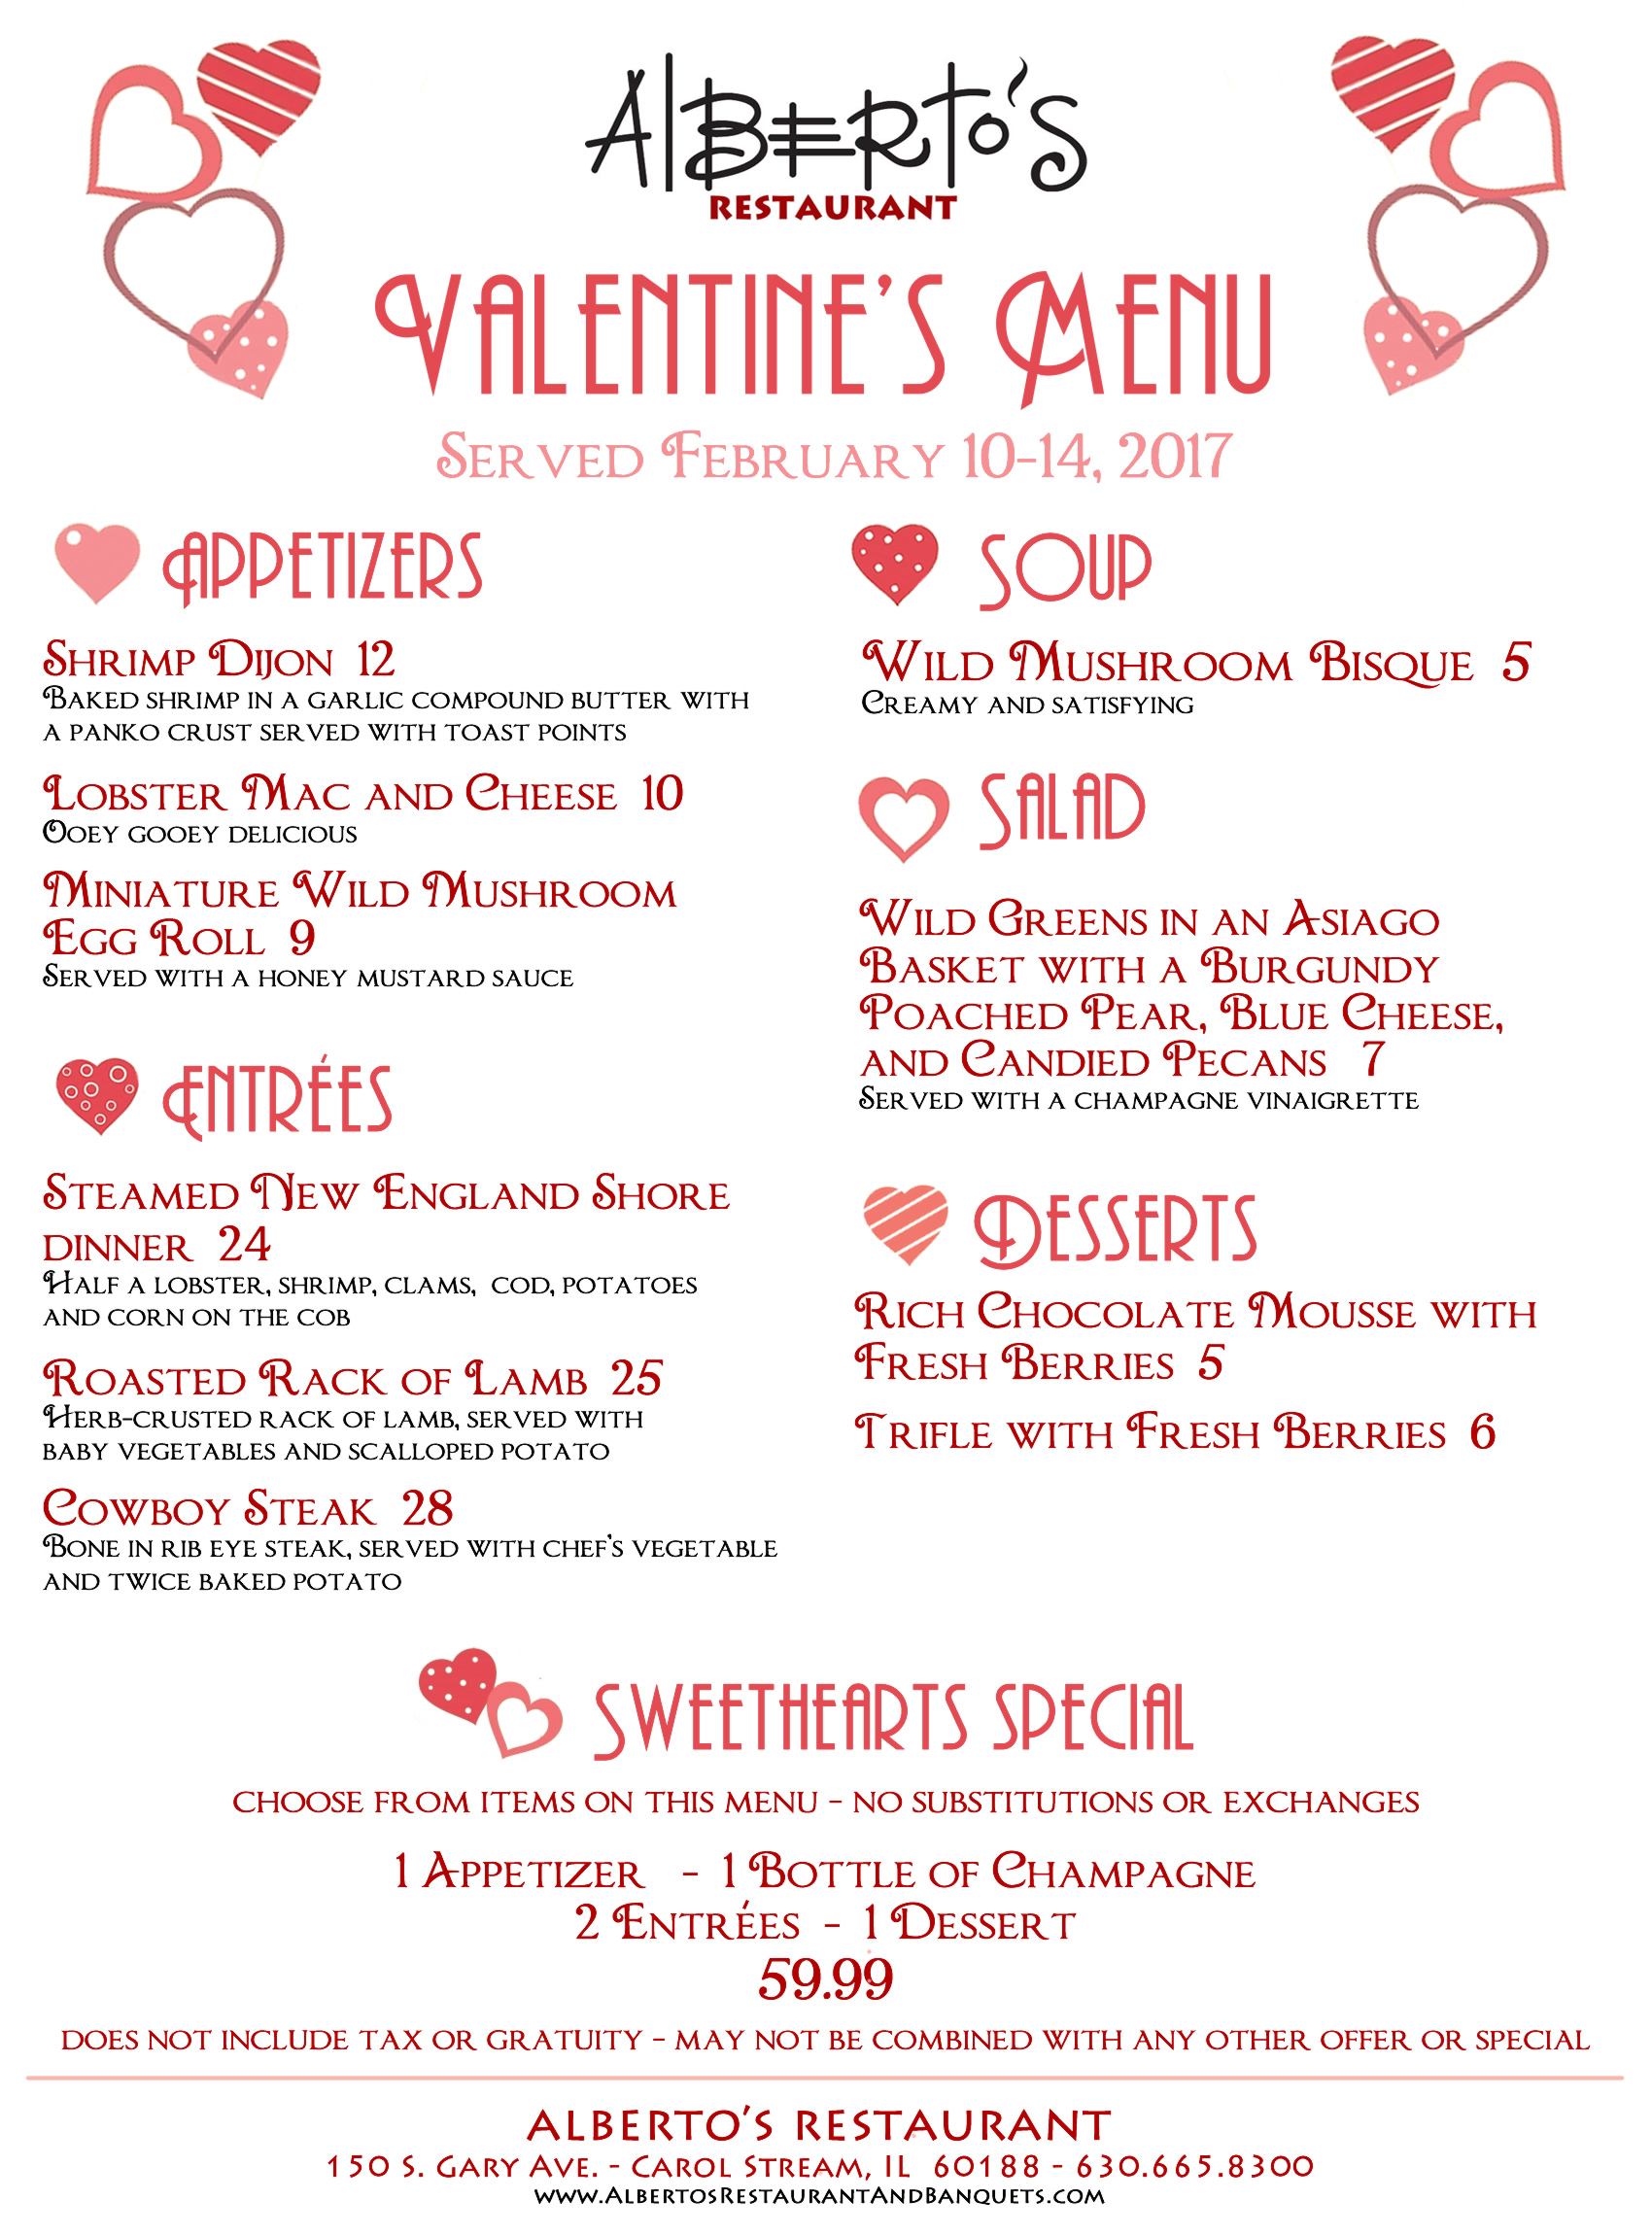 Celebrate Valentine’s Day with A Romantic Dinner for 2 at Alberto’s